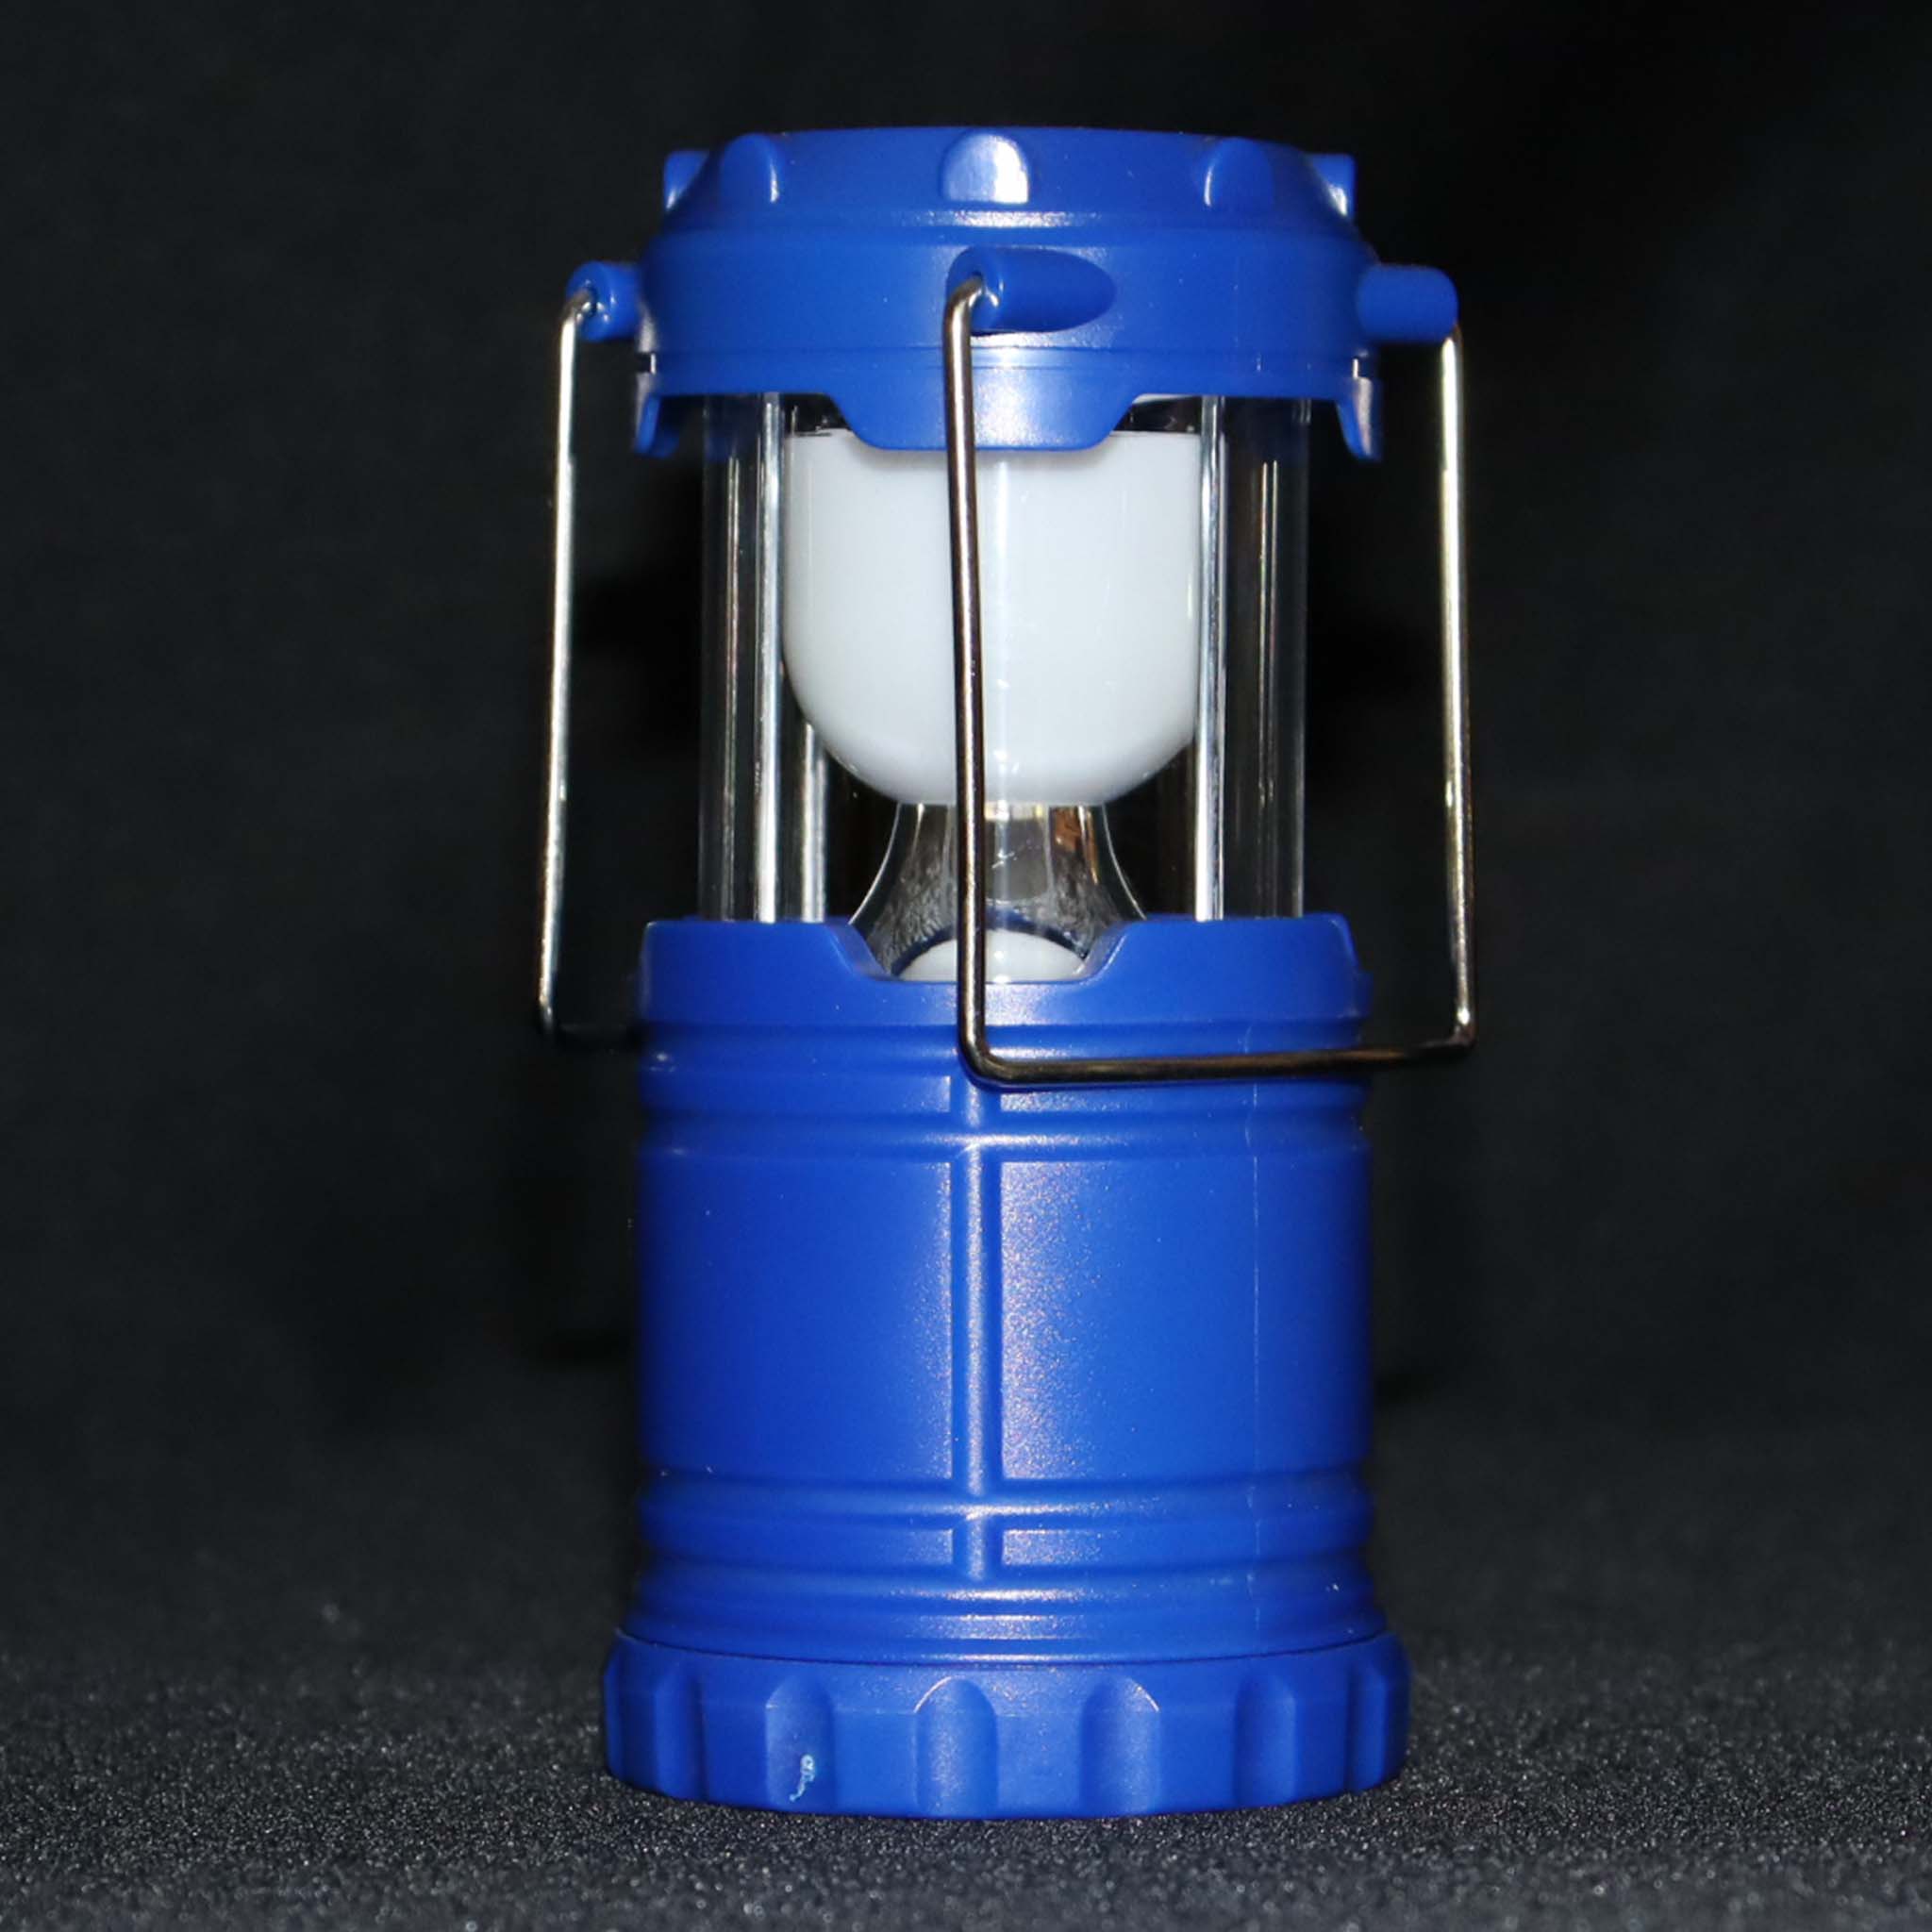 Battery Operated Lanterns, Camping Tent Lights BG-C006